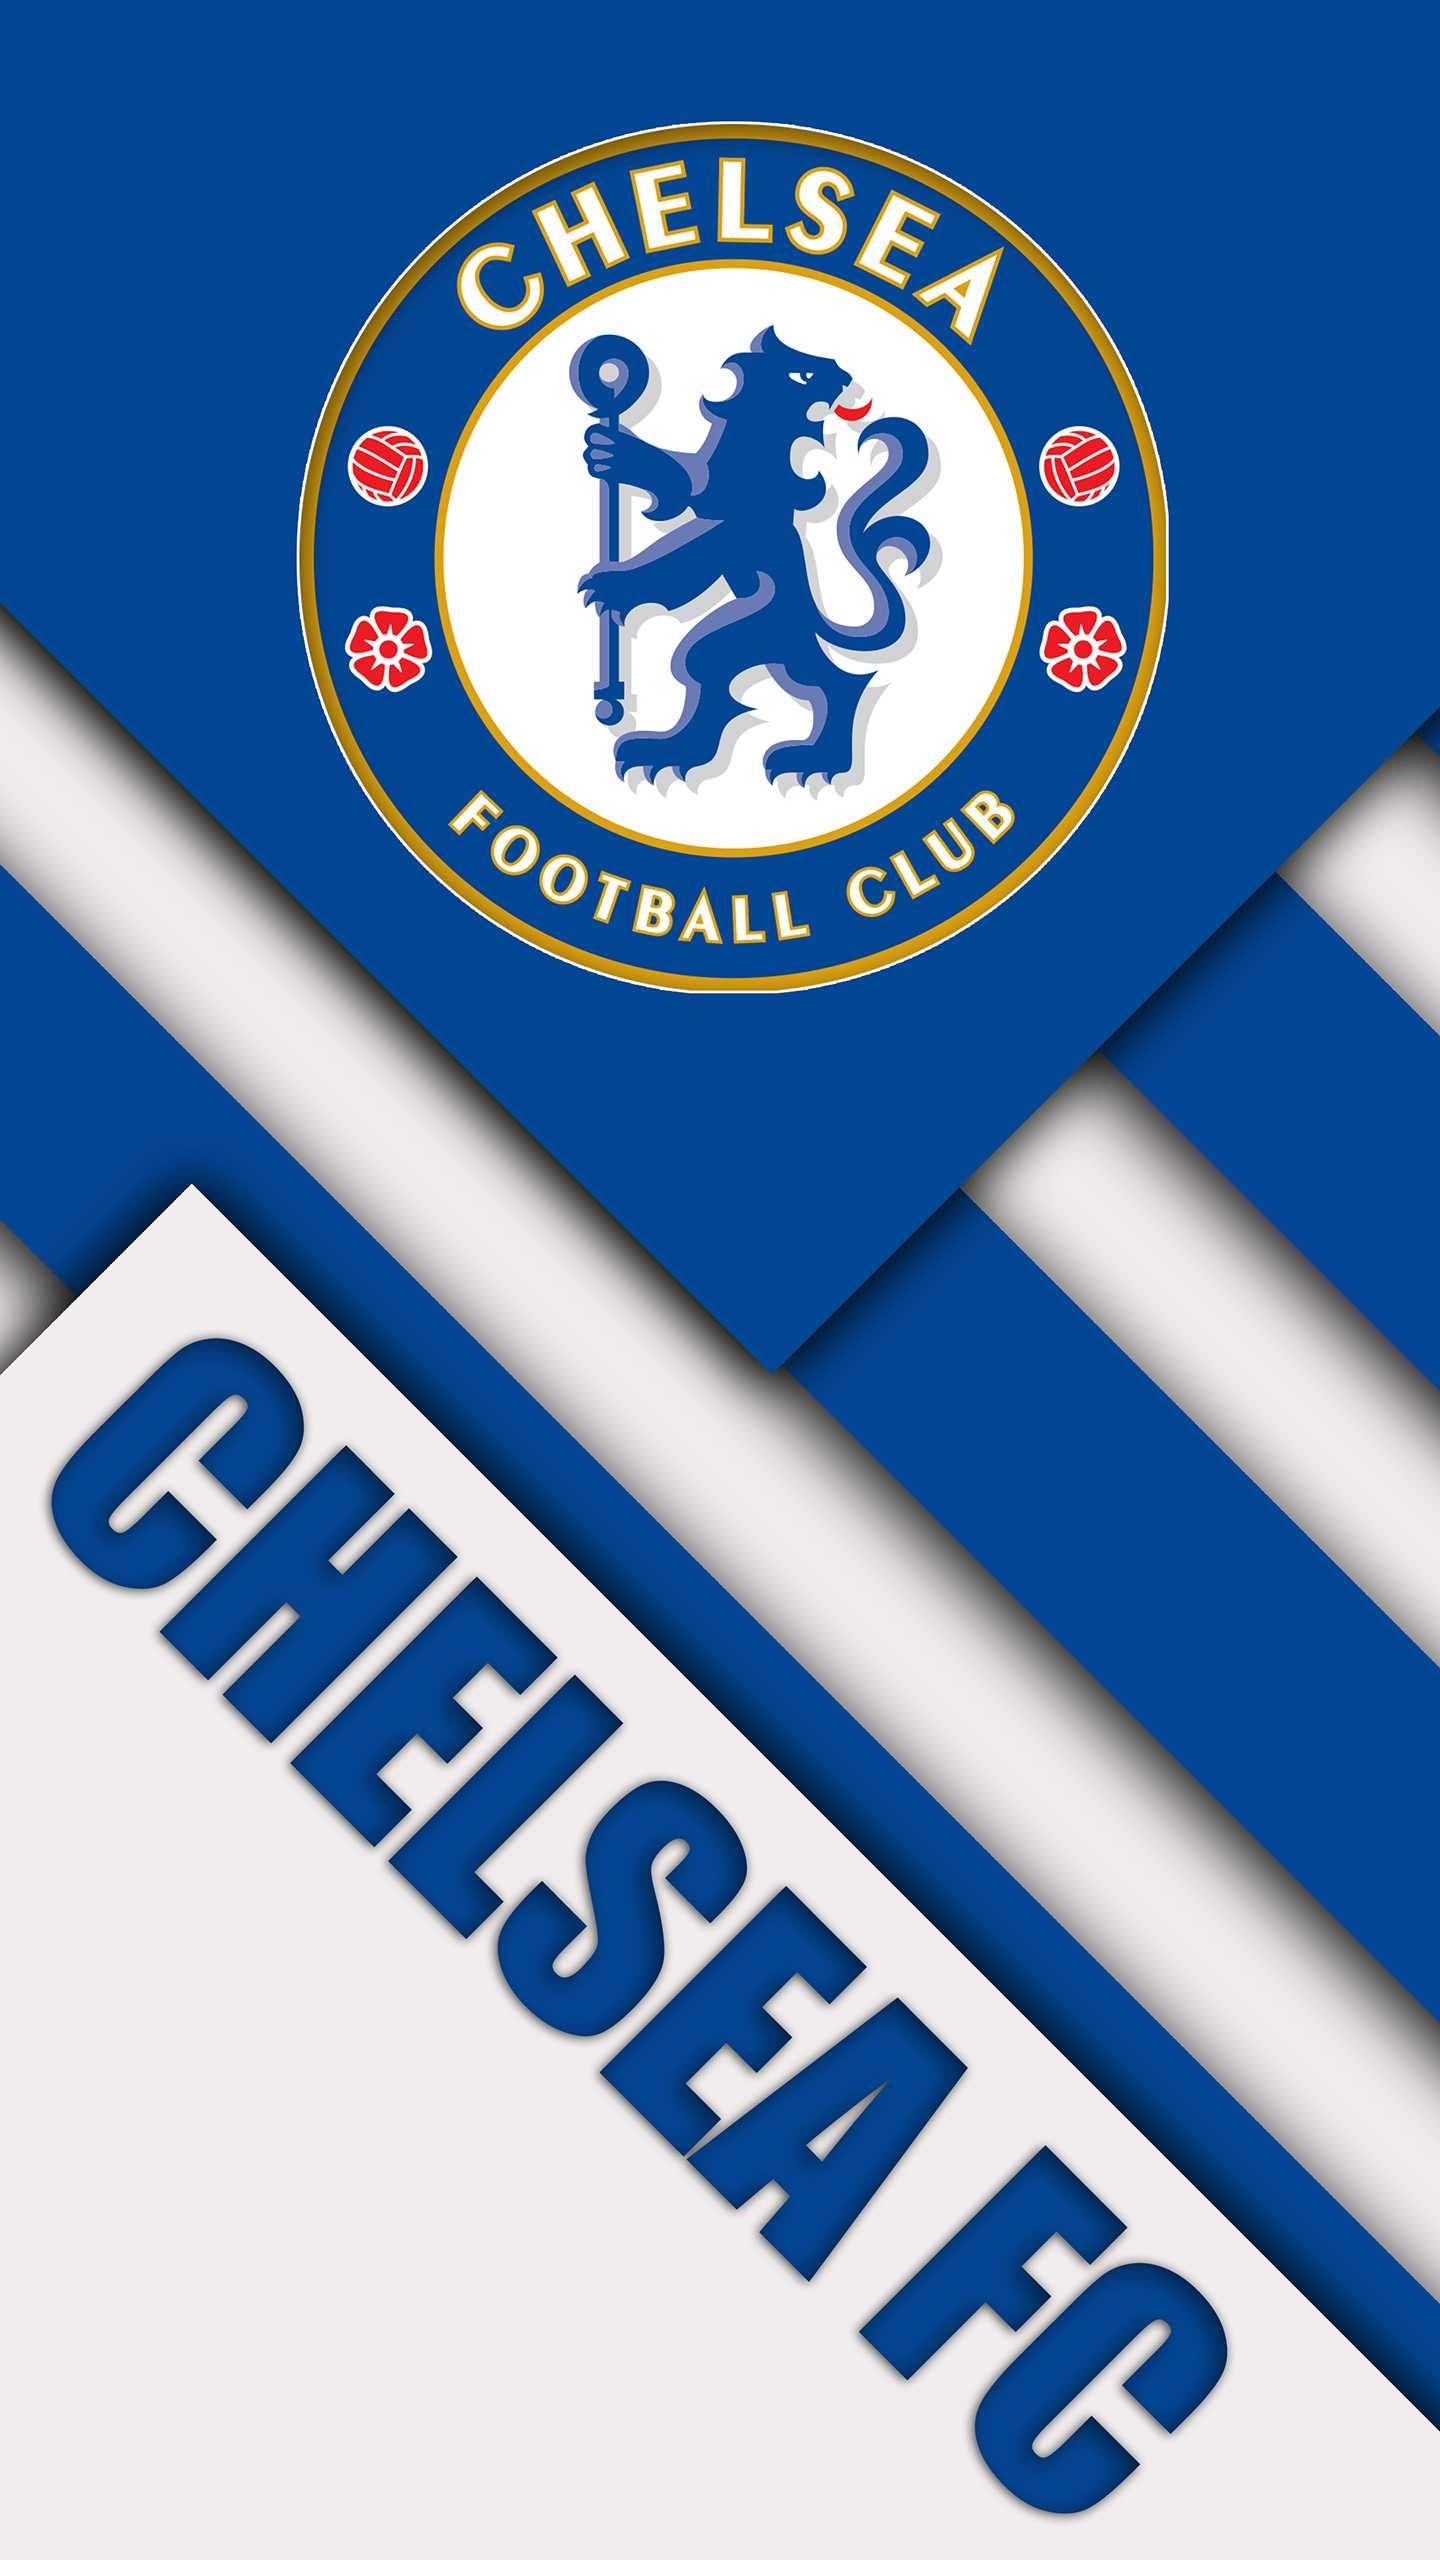 Chelsea: The Blues, One of the most successful clubs in English football. 1440x2560 HD Wallpaper.